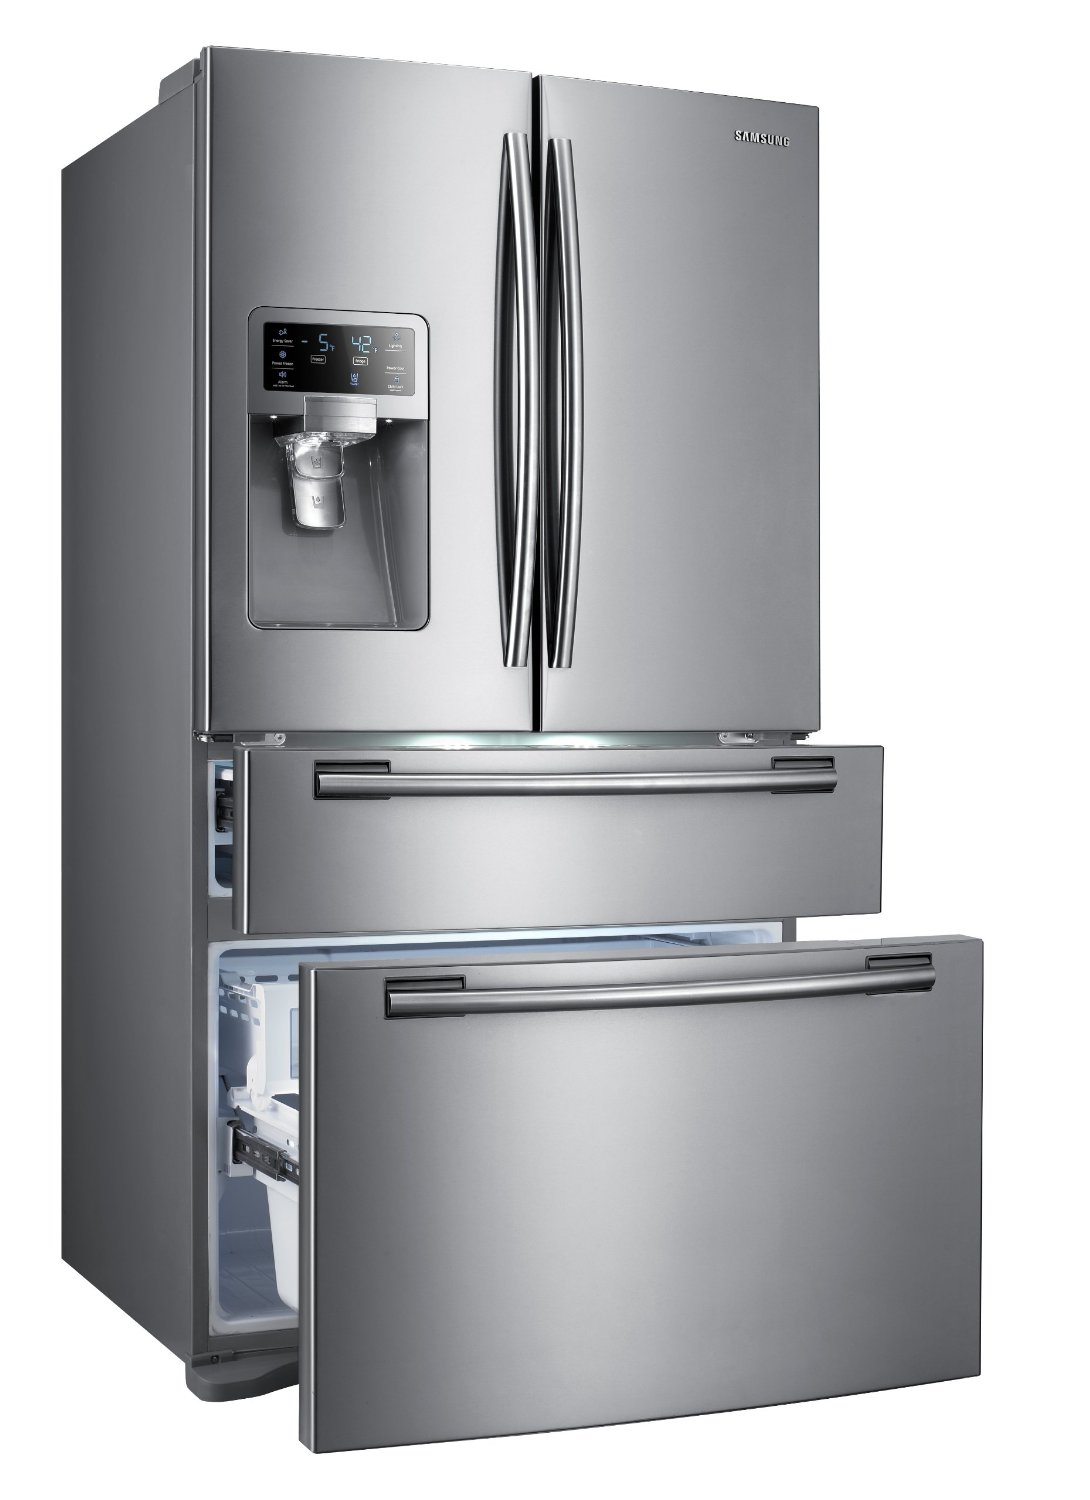 Looking for a great French Door refrigerator? – Check out Whirlpool WRX735SDBM | Full Review